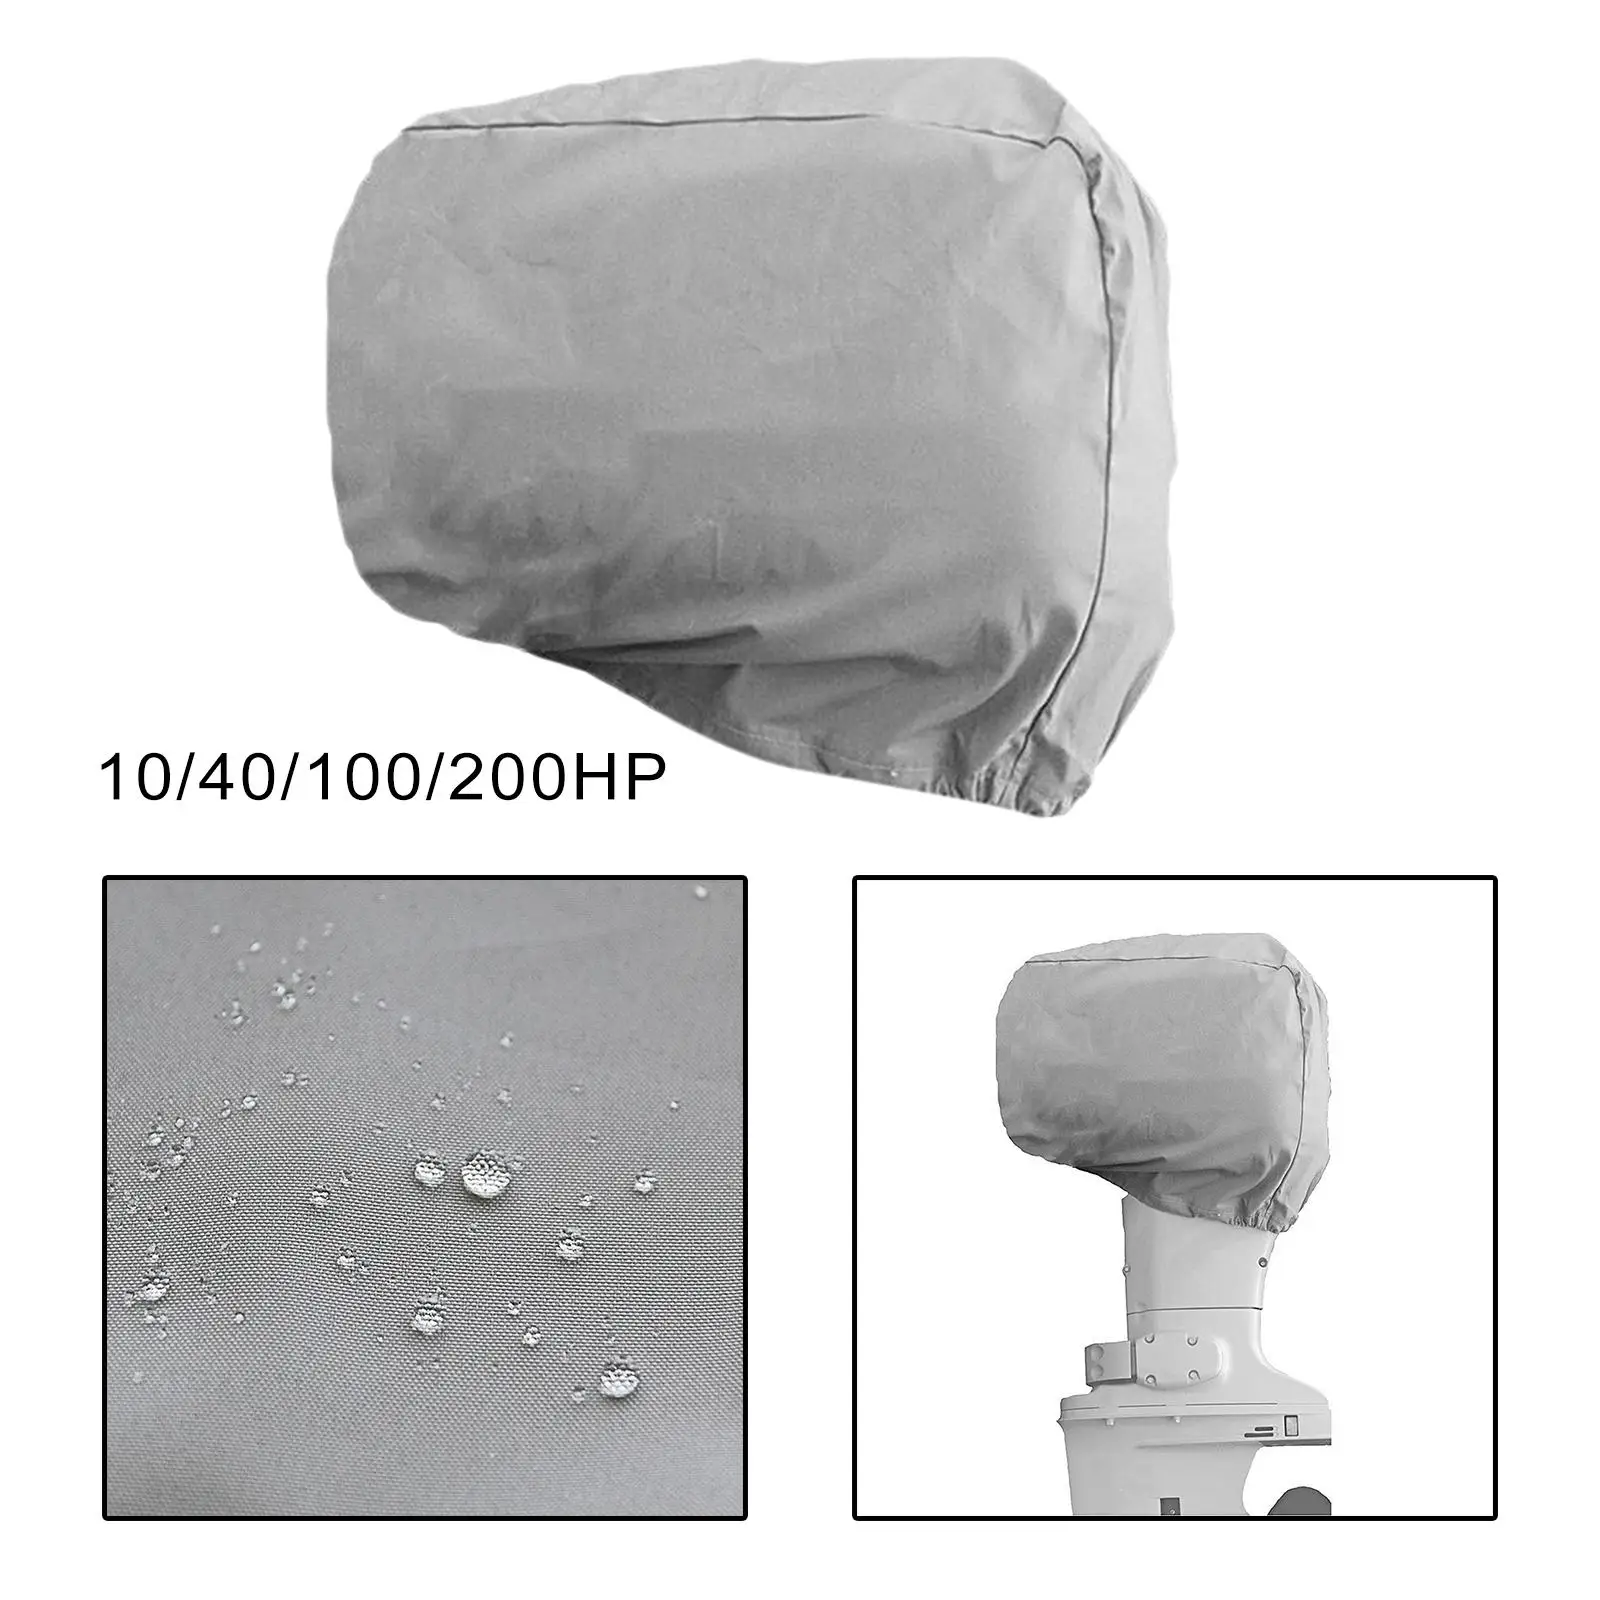 Outboard Motor Cover, Heavy Duty Oxford WeatherBoat  Covers for Sea